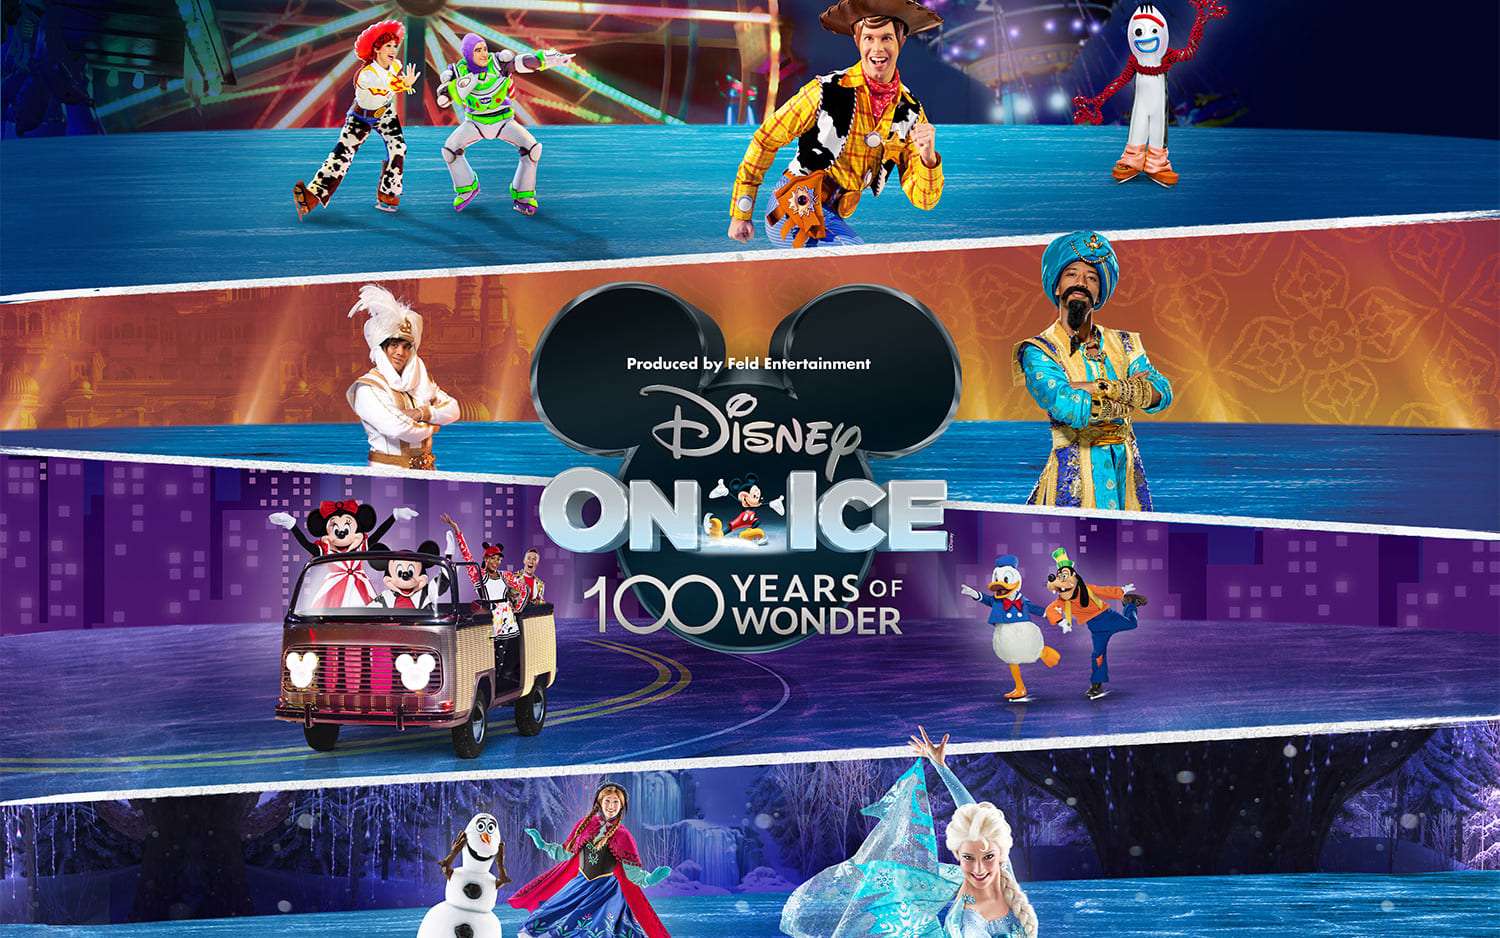 LOOK: Ticket prices for 'Disney on Ice' this December revealed